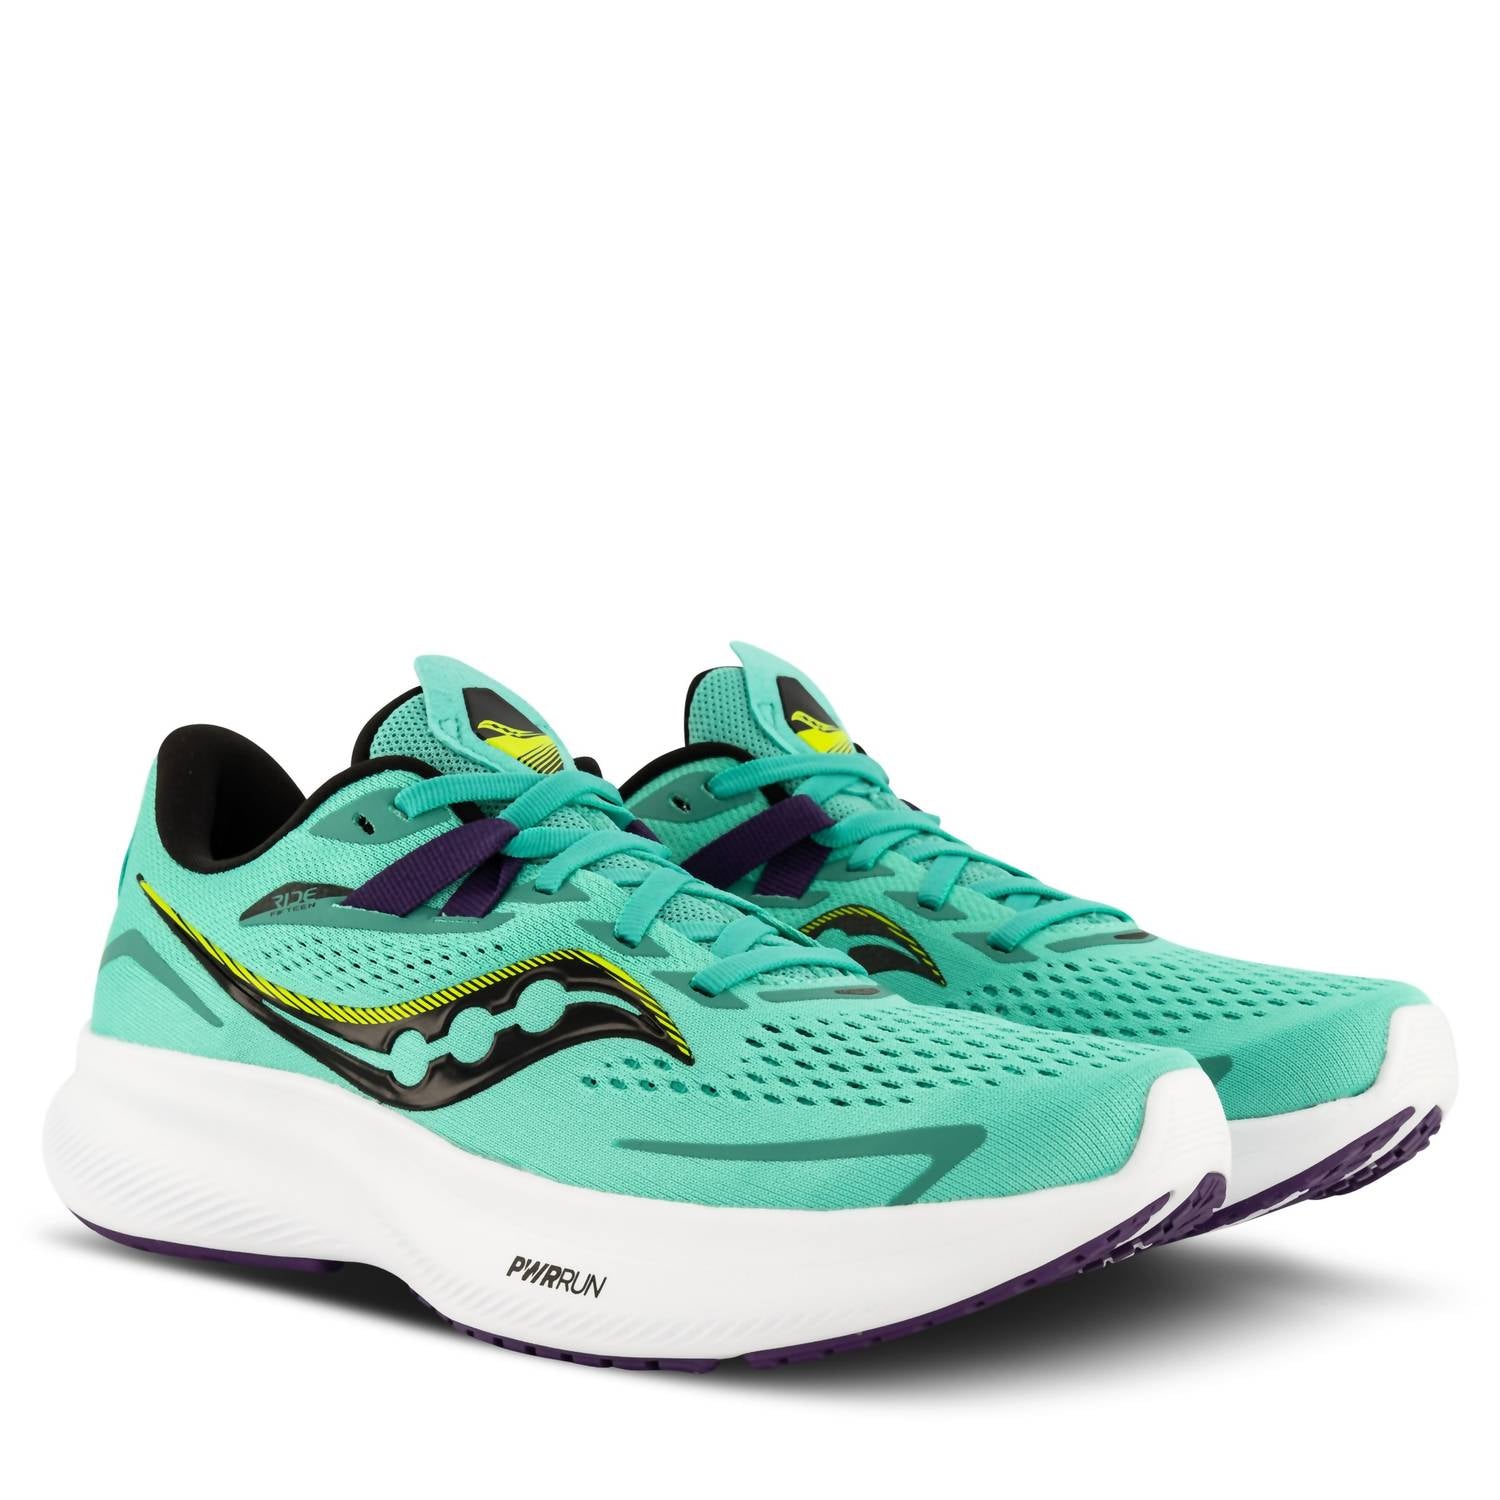 Saucony Women's Ride 15 Running Shoes In Cool Mint/acid US 9.5 female